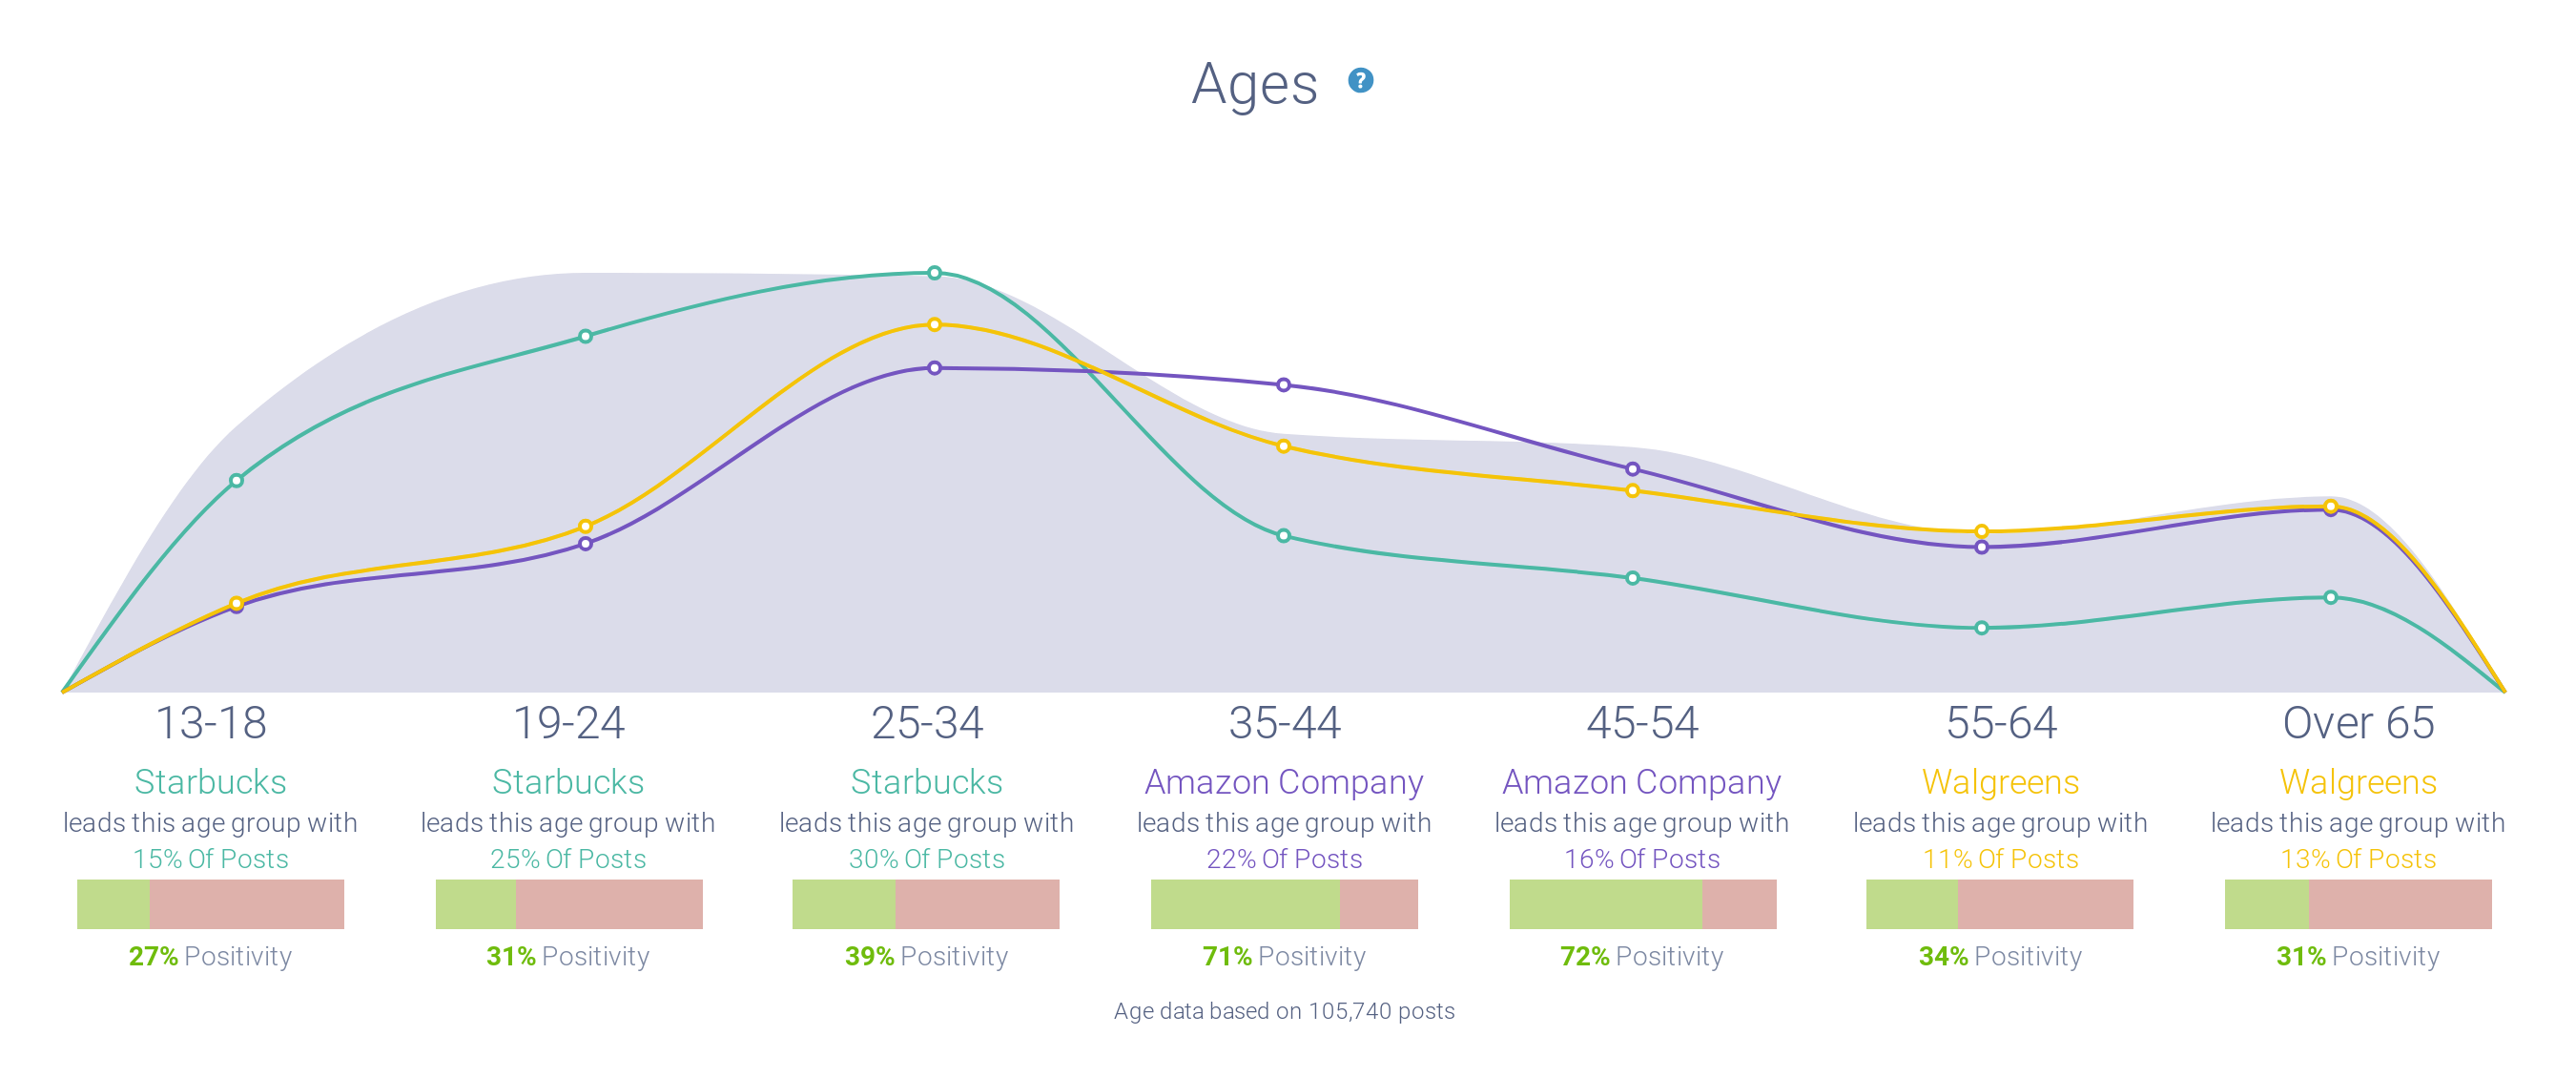 Post volume comparison of various online retailers by age demographic
